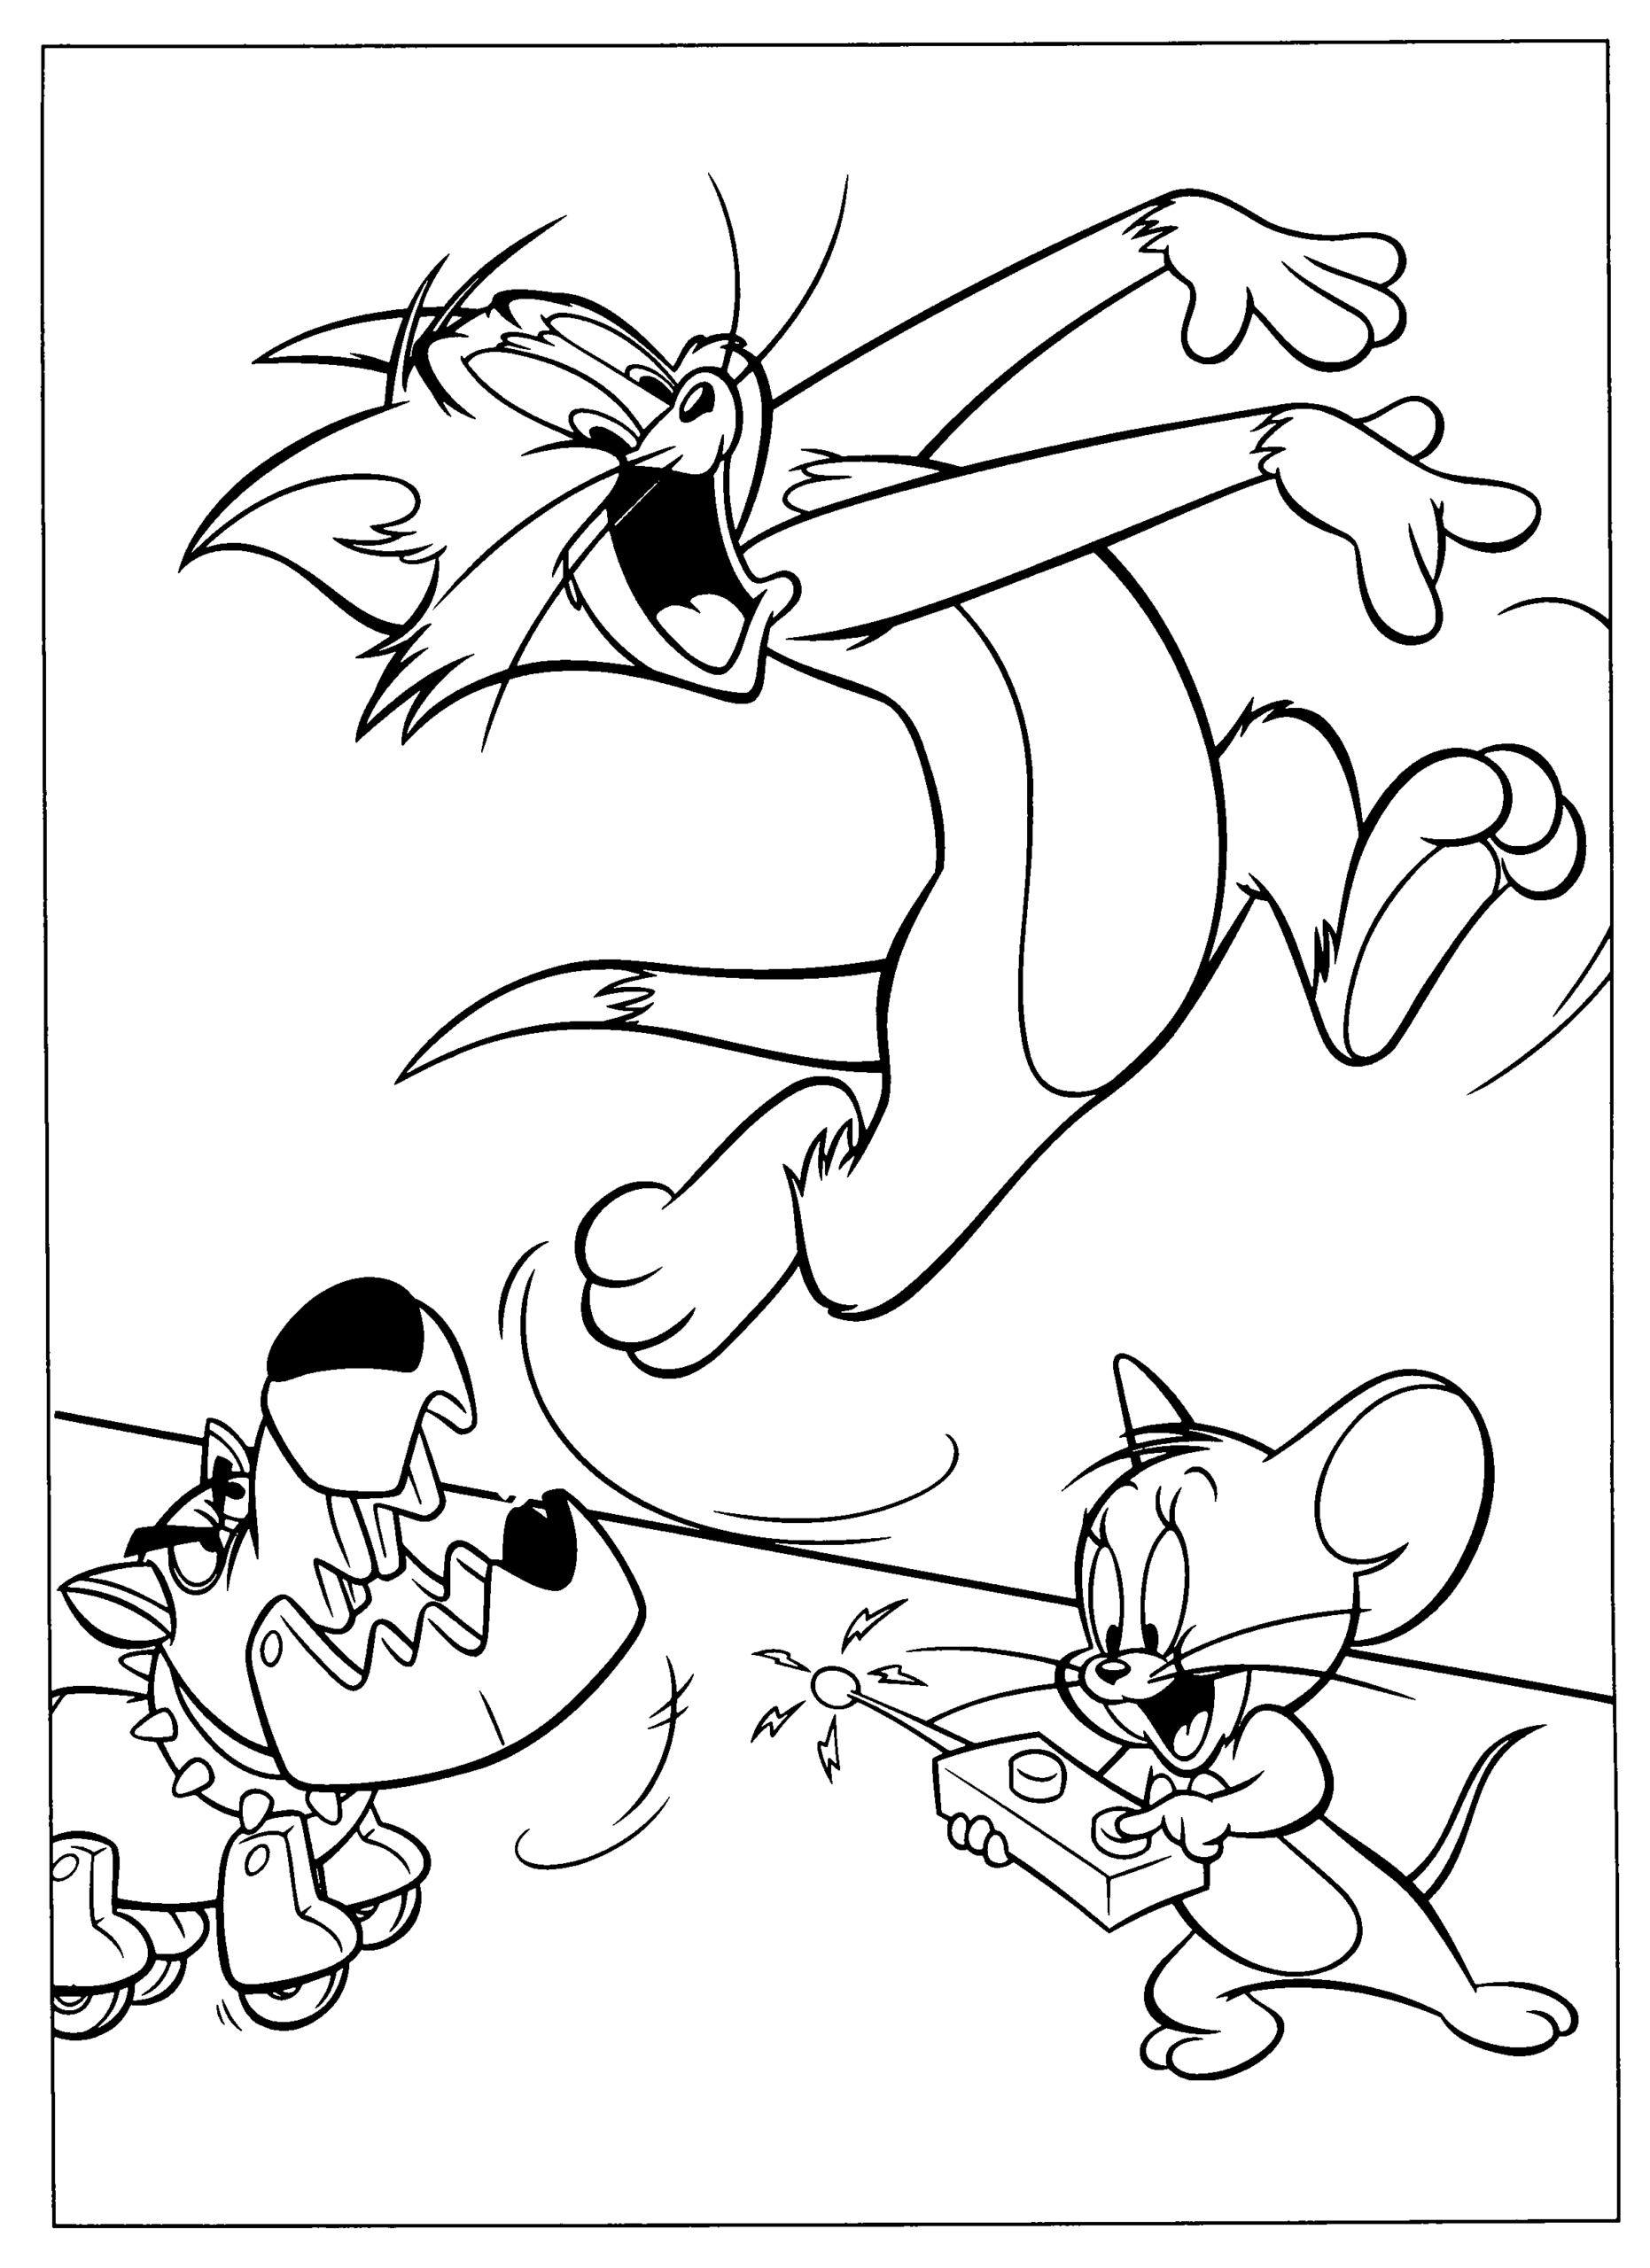 Tom and Jerry Coloring Pages TV Film Printable 2020 10097 Coloring4free